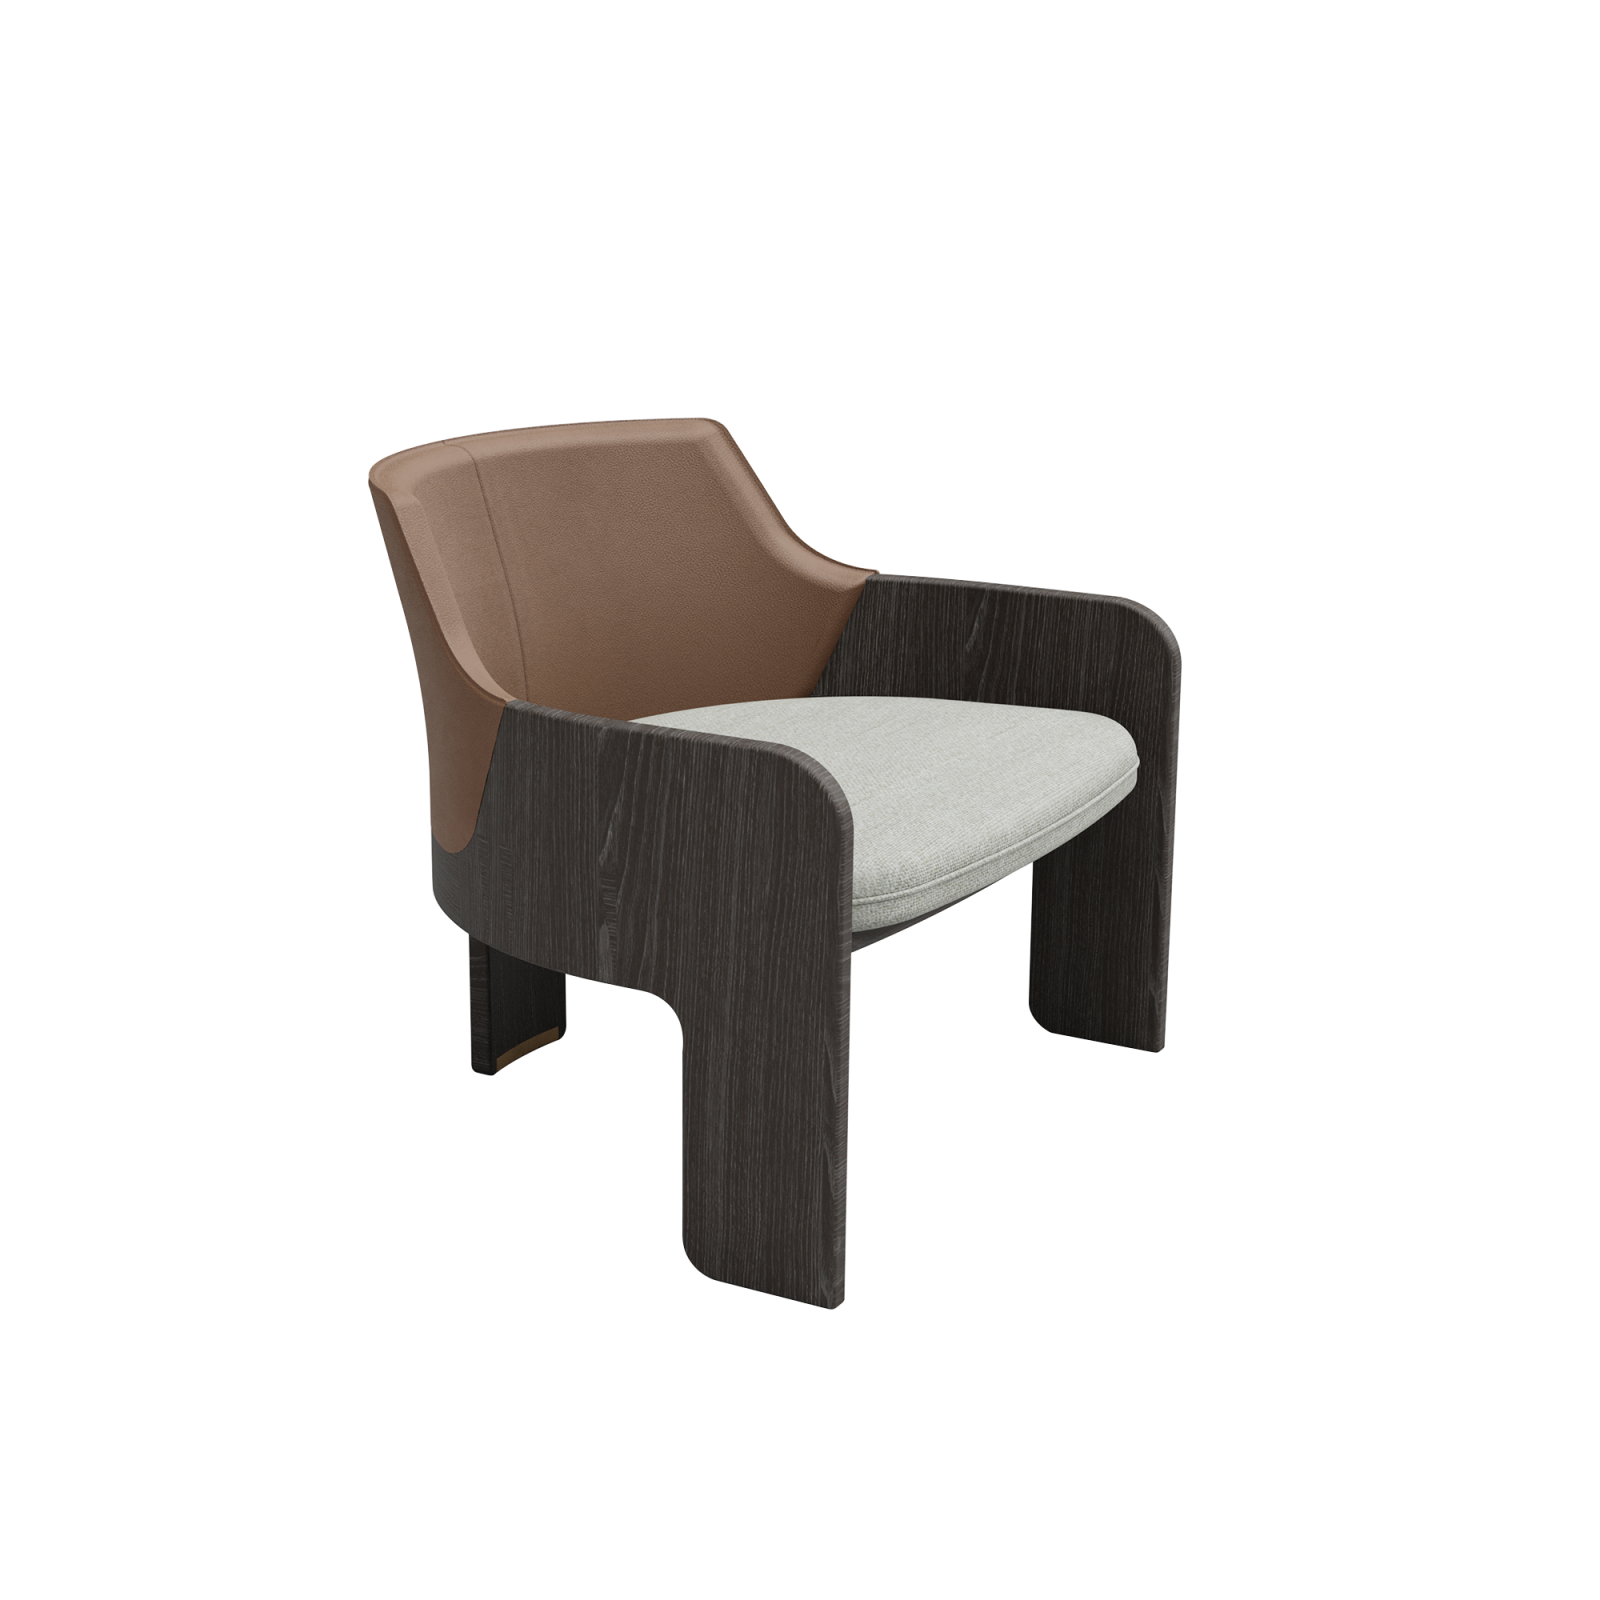 Brown Soul Armchair, consisting of a 3-legged body design and metal used on the back foot and leather details on the back